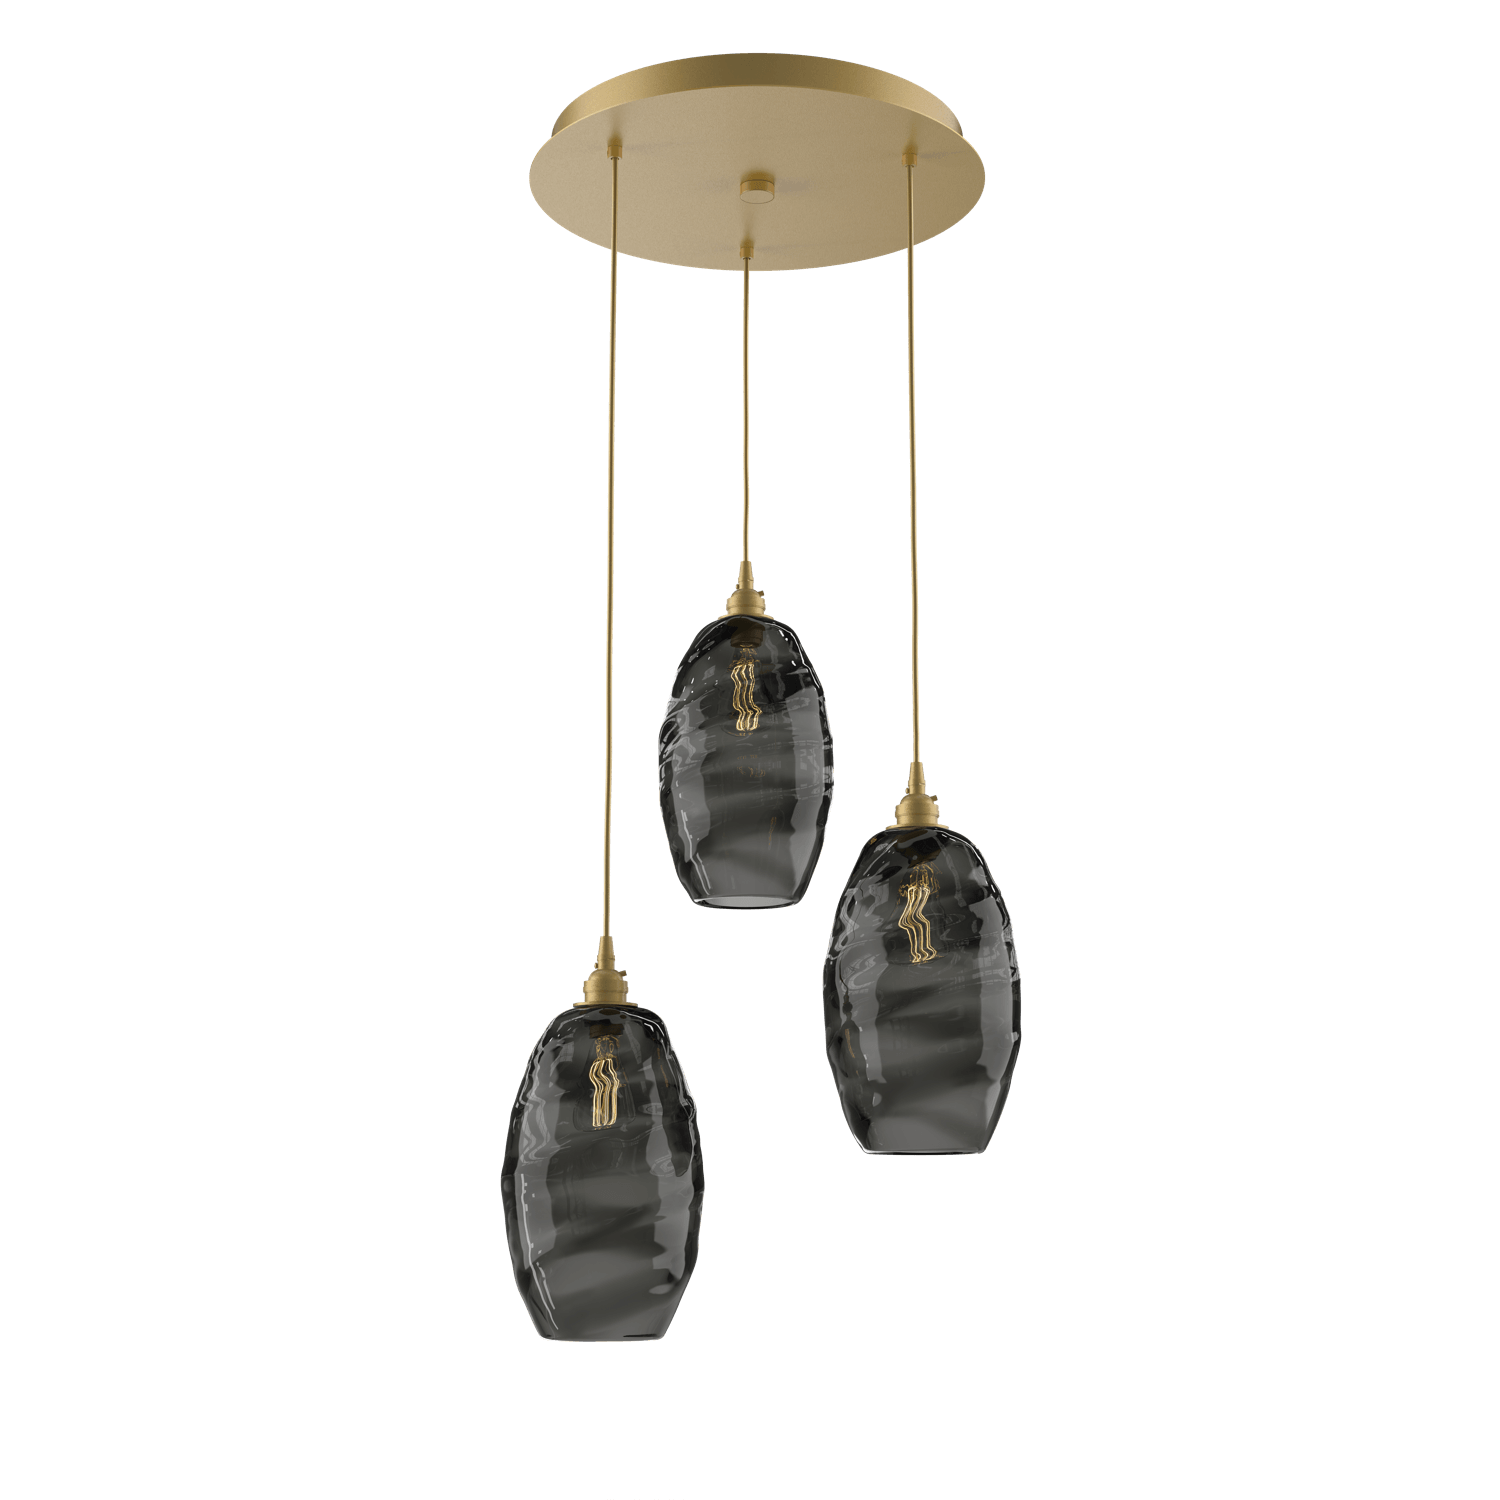 CHB0035-03-GB-OS-Hammerton-Studio-Optic-Blown-Glass-Elisse-3-light-round-pendant-chandelier-with-gilded-brass-finish-and-optic-smoke-blown-glass-shades-and-incandescent-lamping